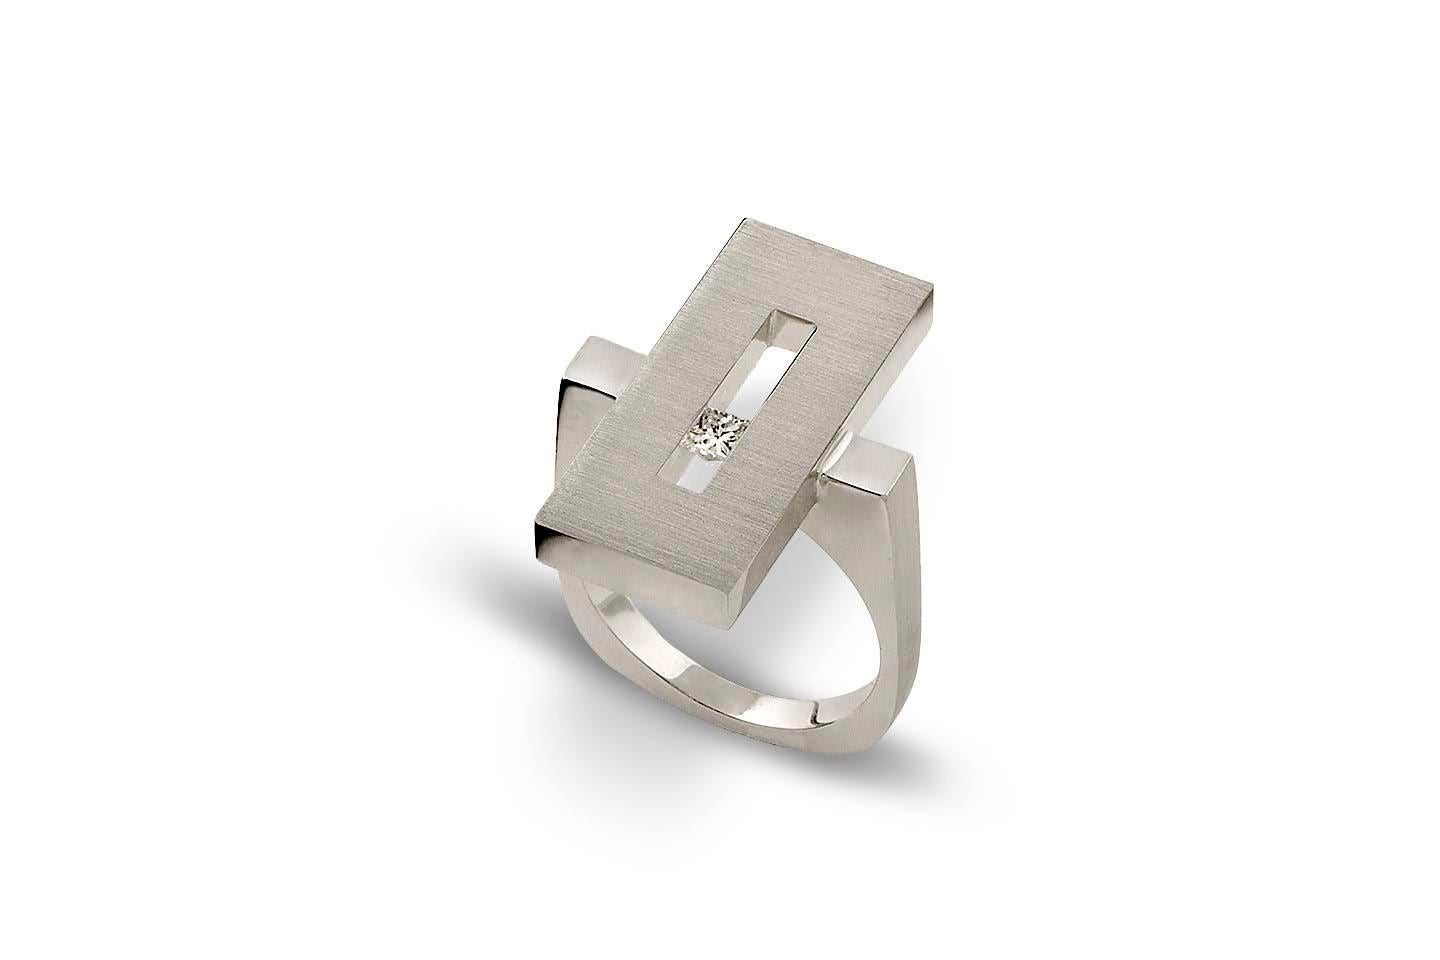 This modern Diamond in White Gold Suspended Rectangle Ring is part of our Suspension Collection, an architectural element transformed into a ring. The cantilever seems to teeter on a slim square shank. Shown here in white gold set off center with an